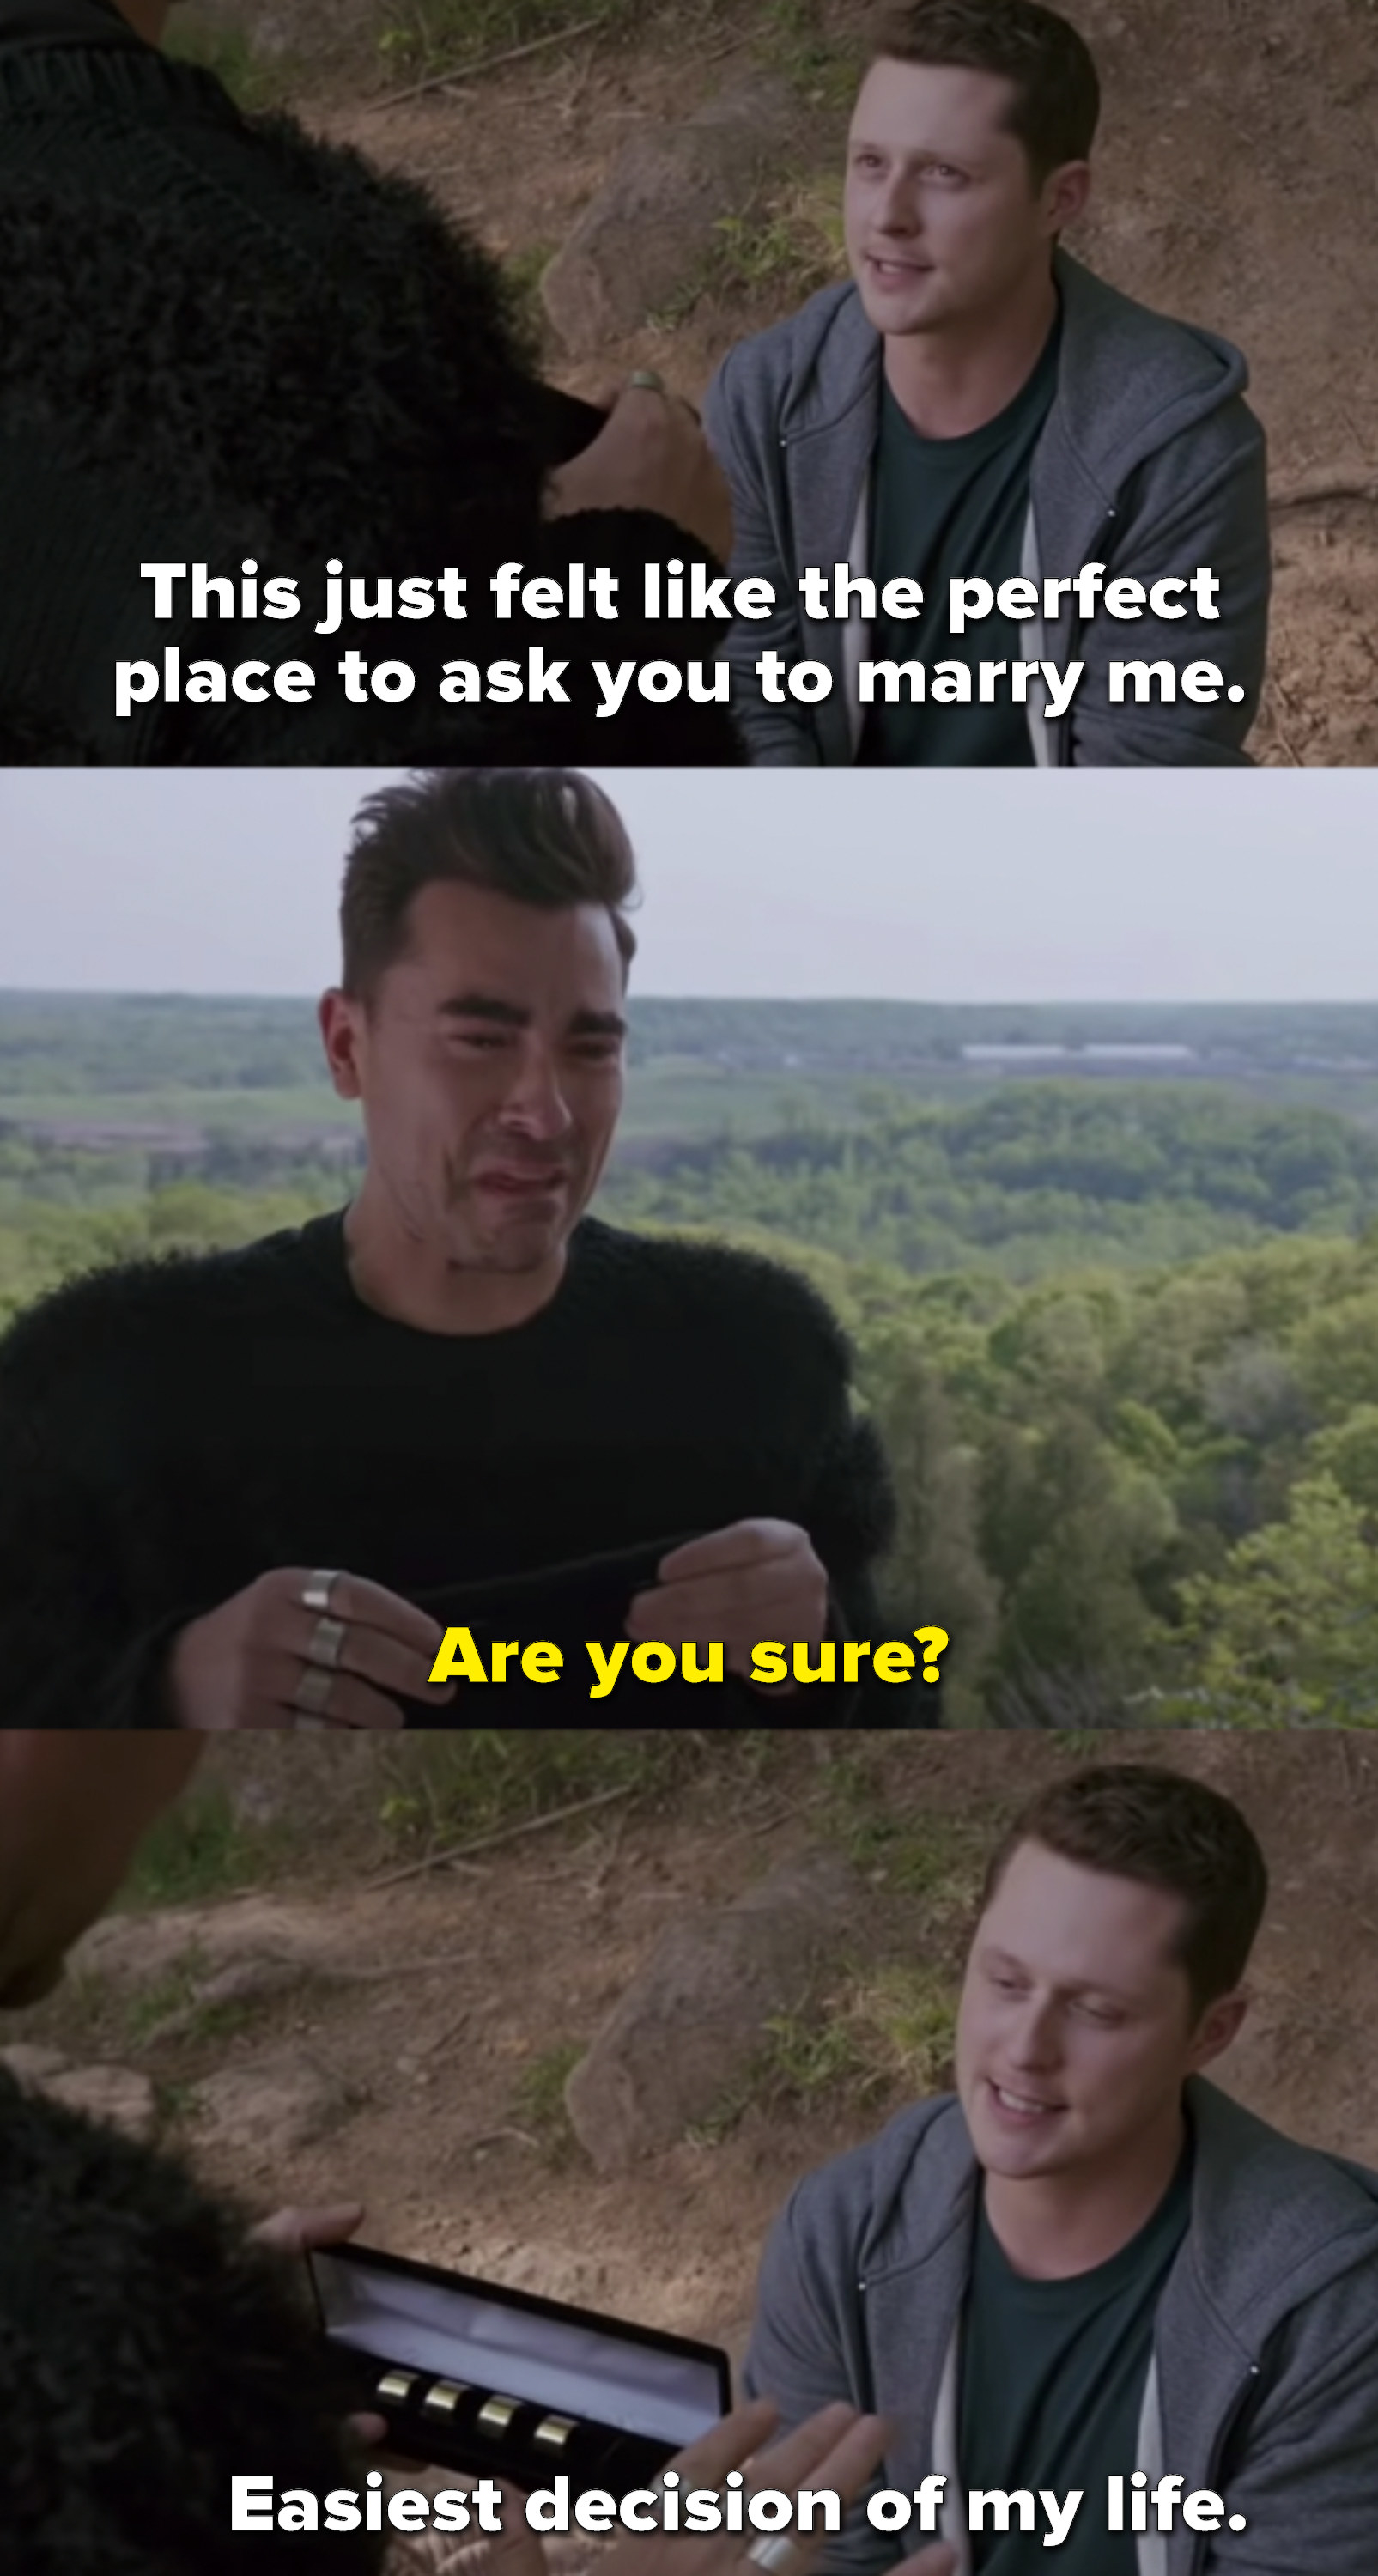 Patrick says he thought this was the perfect place to propose to David, then presents him with rings. David asks if he&#x27;s sure, and Patrick says it was the easiest decision of his life